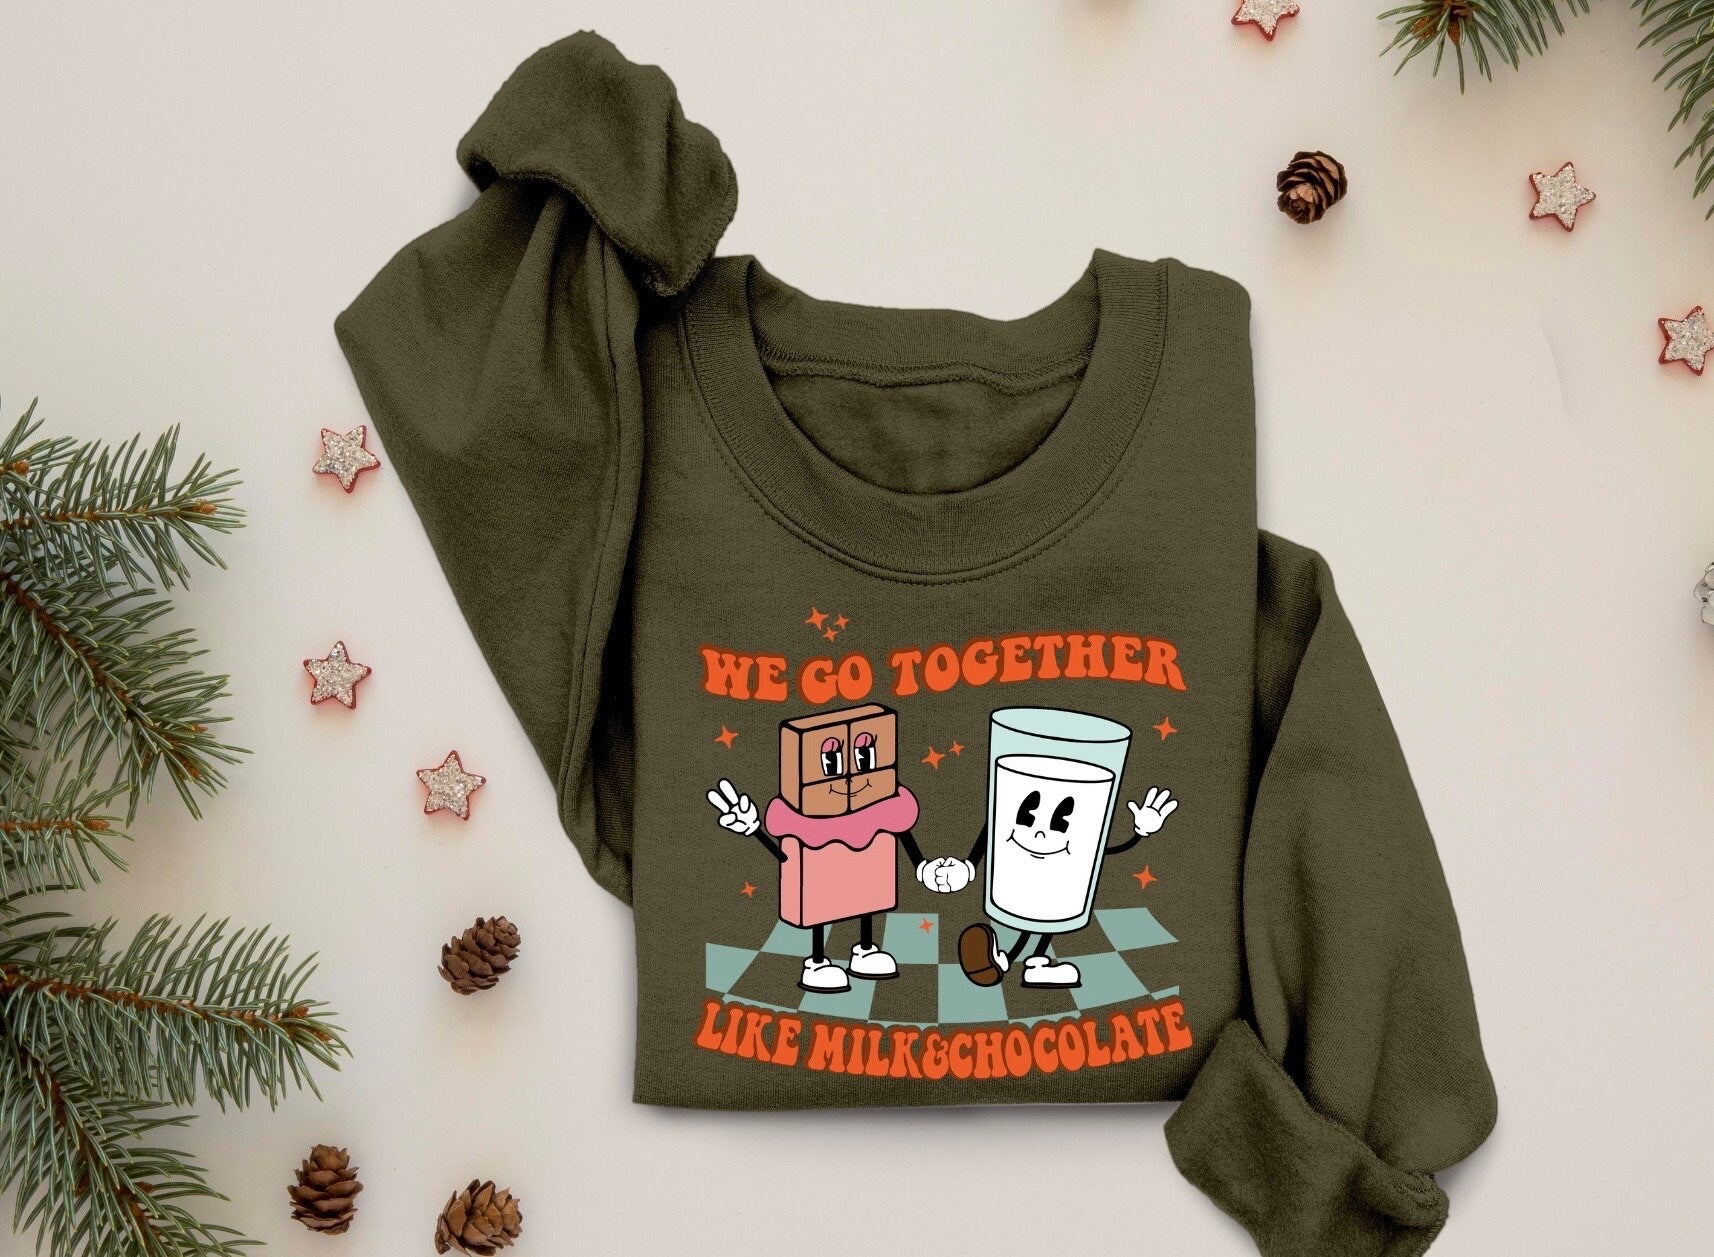 We Go Together Hoodie, We Go Together Sweater, We Go Together Sweatshirt, We Go Together Crewneck, We Go Together Tshirt, We Go Together Tee